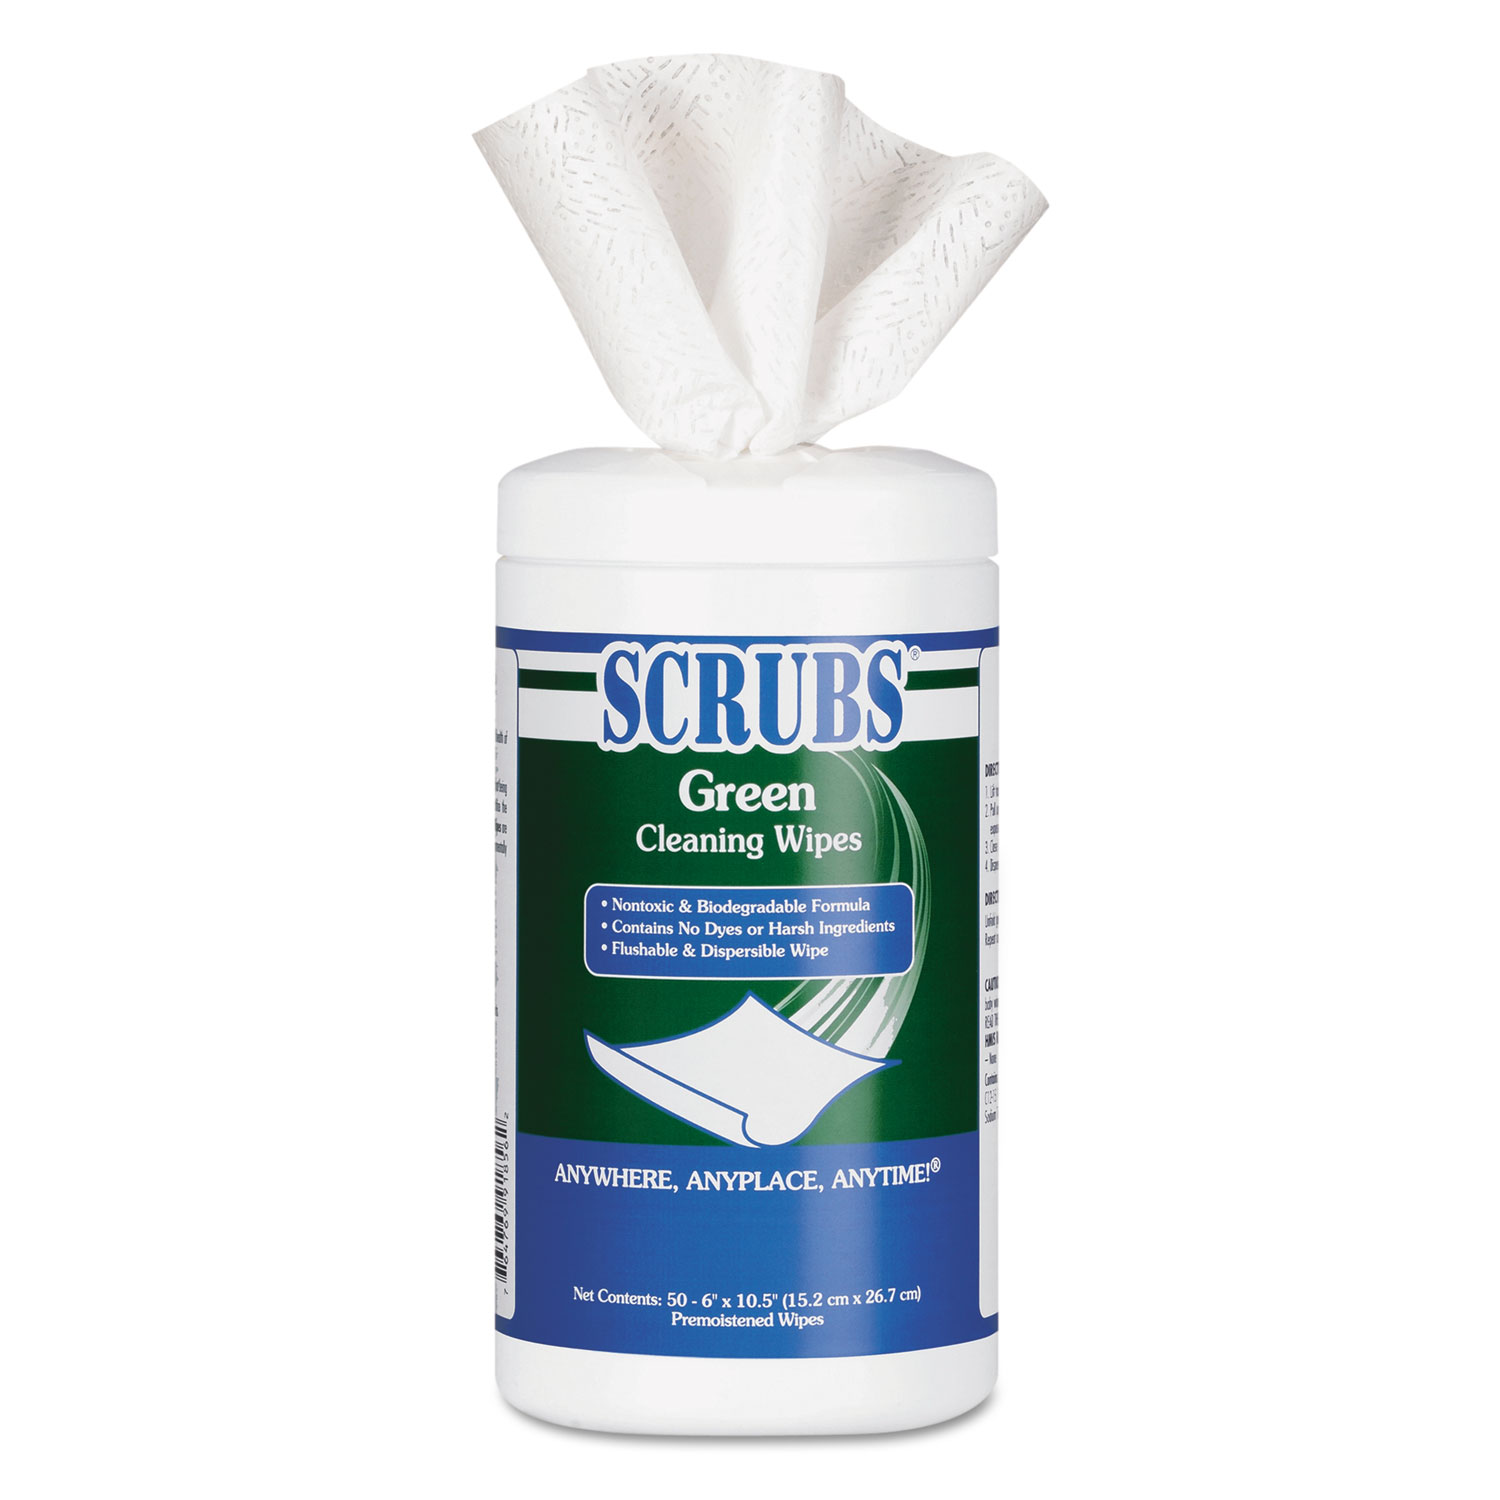  SCRUBS 91856 Green Cleaning Wipes, 6 x 10 1/2, 50/Container (ITW91856) 